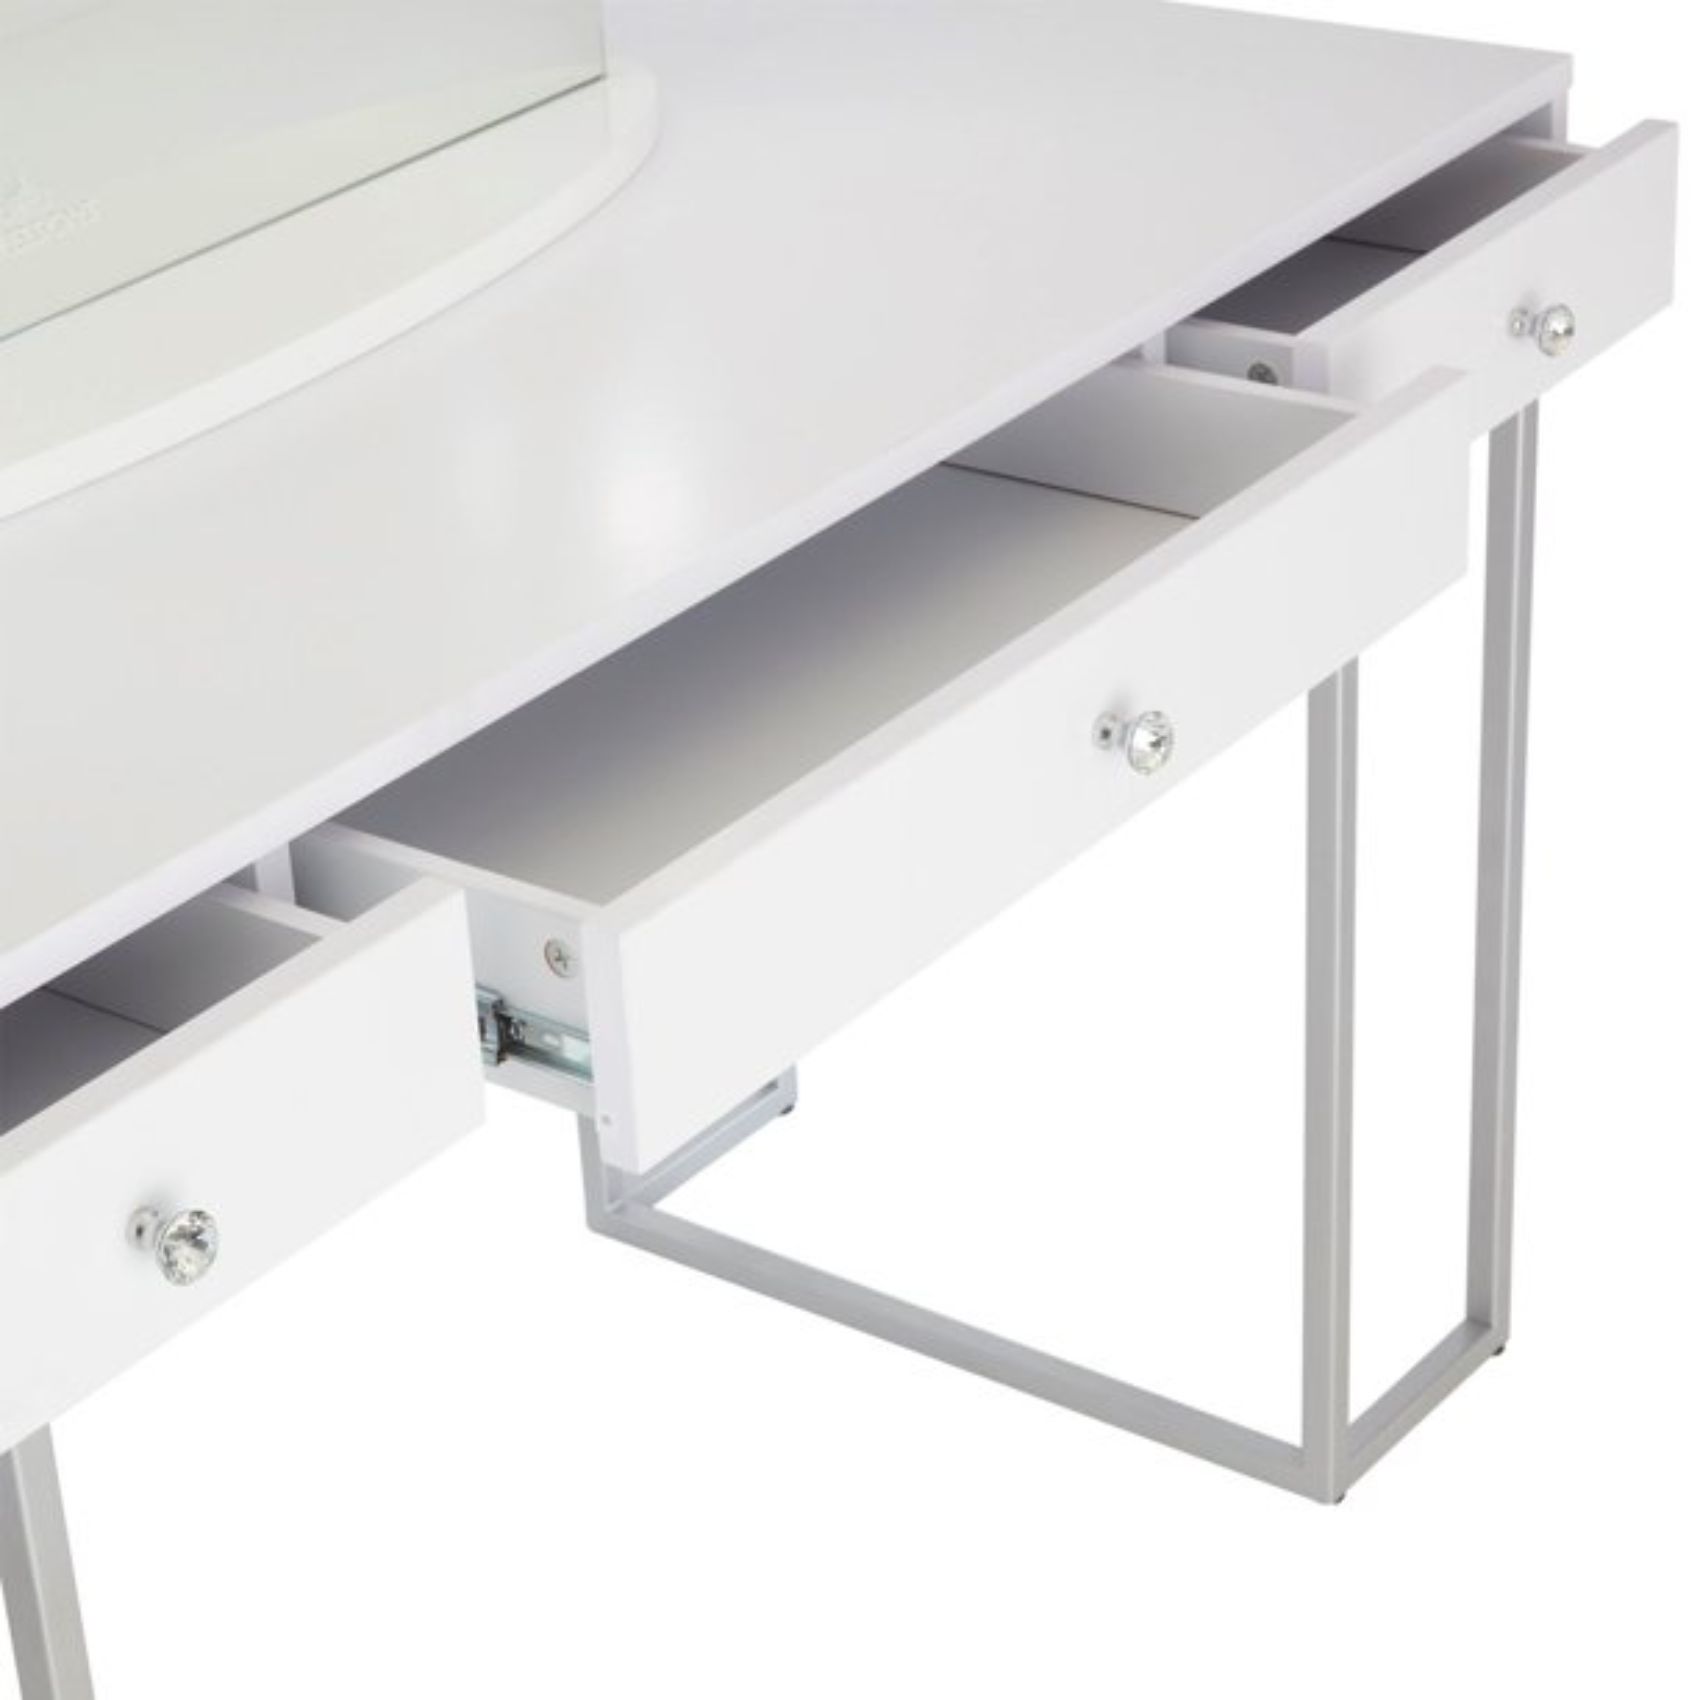 Impressions Vanity Premium Makeup Desk, Celeste Modern Table with 3 Drawers and Crystal Knobs, Perfect for Bedroom Decore (White) - image 4 of 6